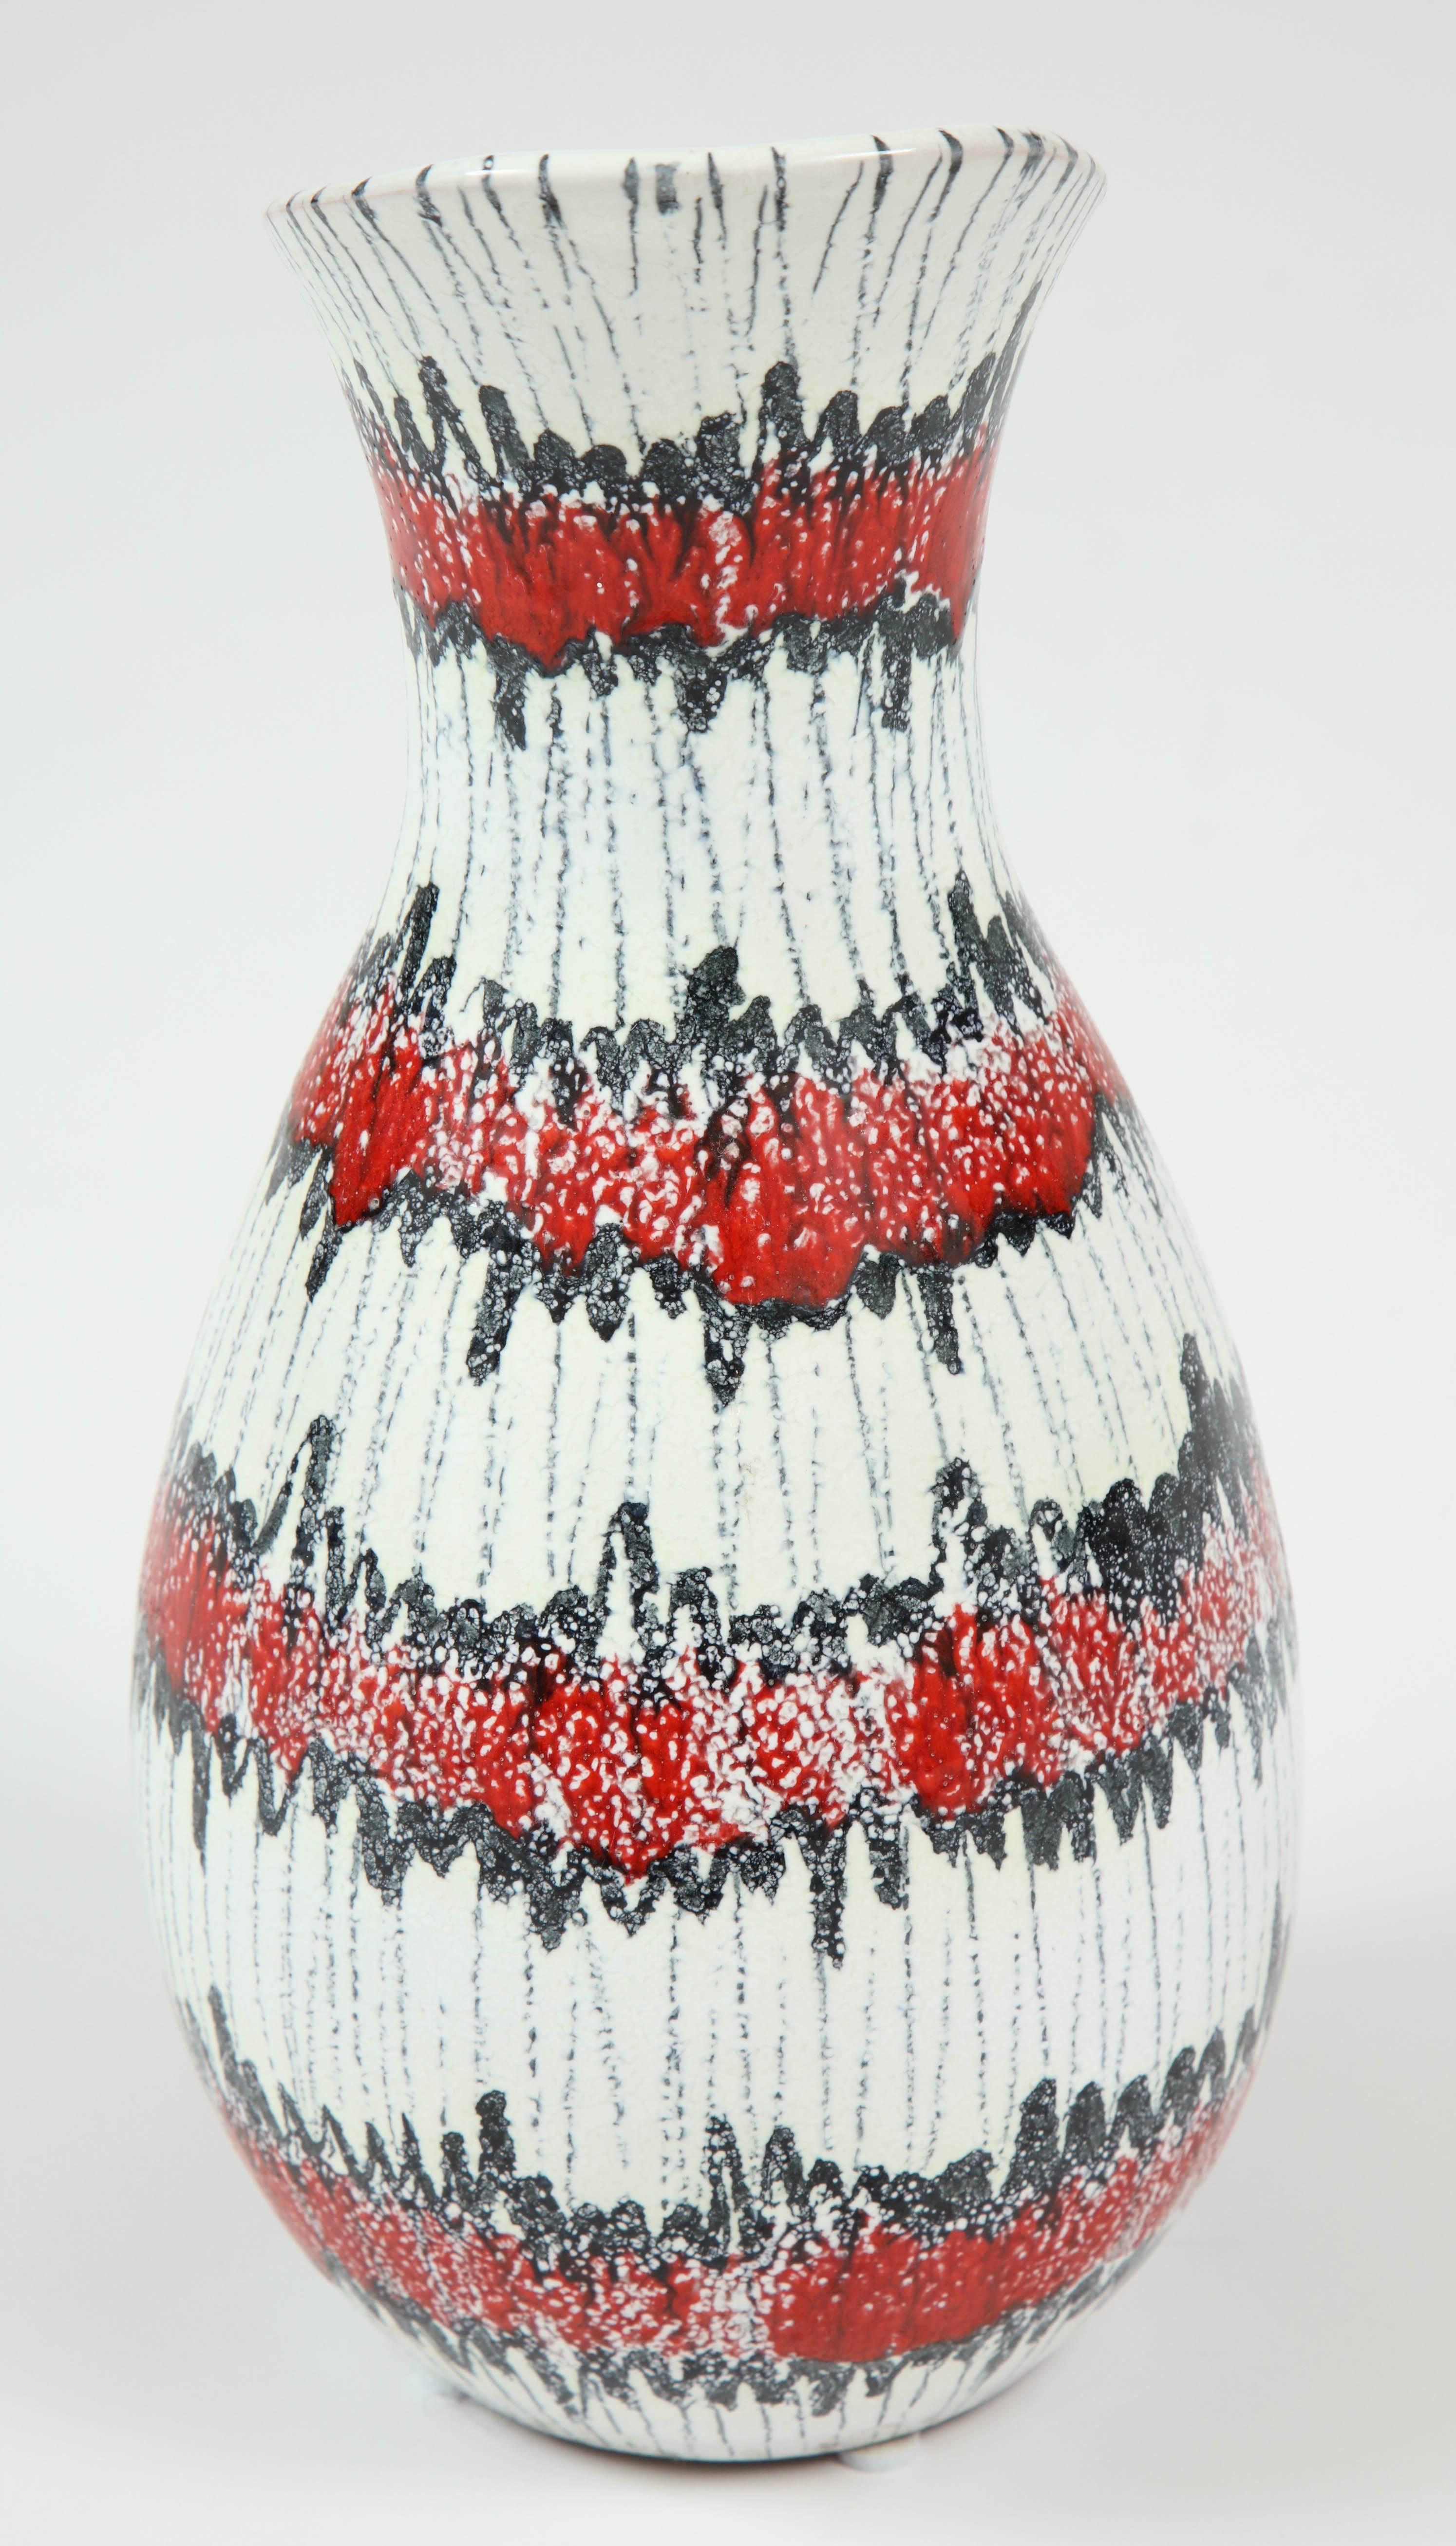 Hand-Crafted Ceramic Pitcher, Red, White and Black, Italy, Midcentury, C 1950, Ceramic For Sale